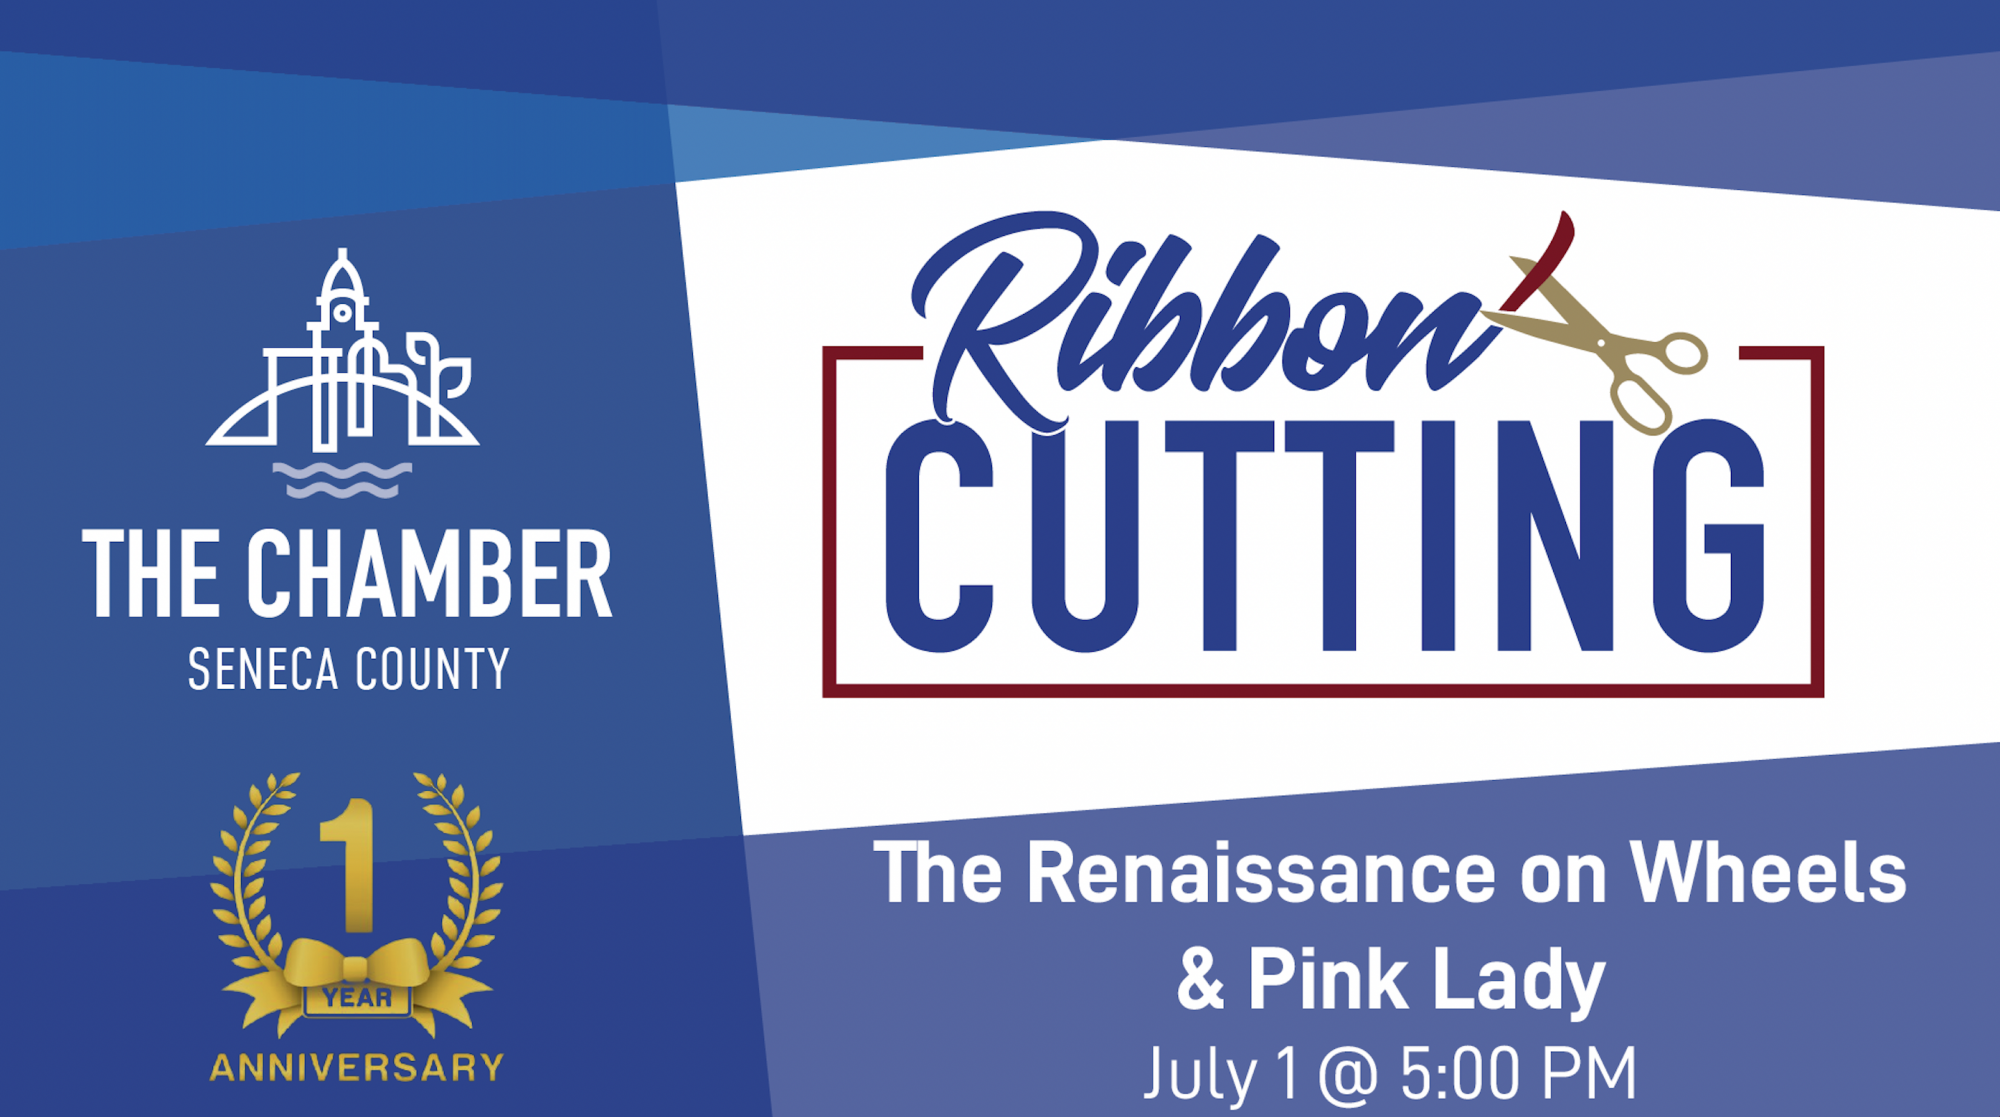 Ribbon Cutting: The Renaissance on Wheels & The Pink Lady Celebrate One Year Anniversary